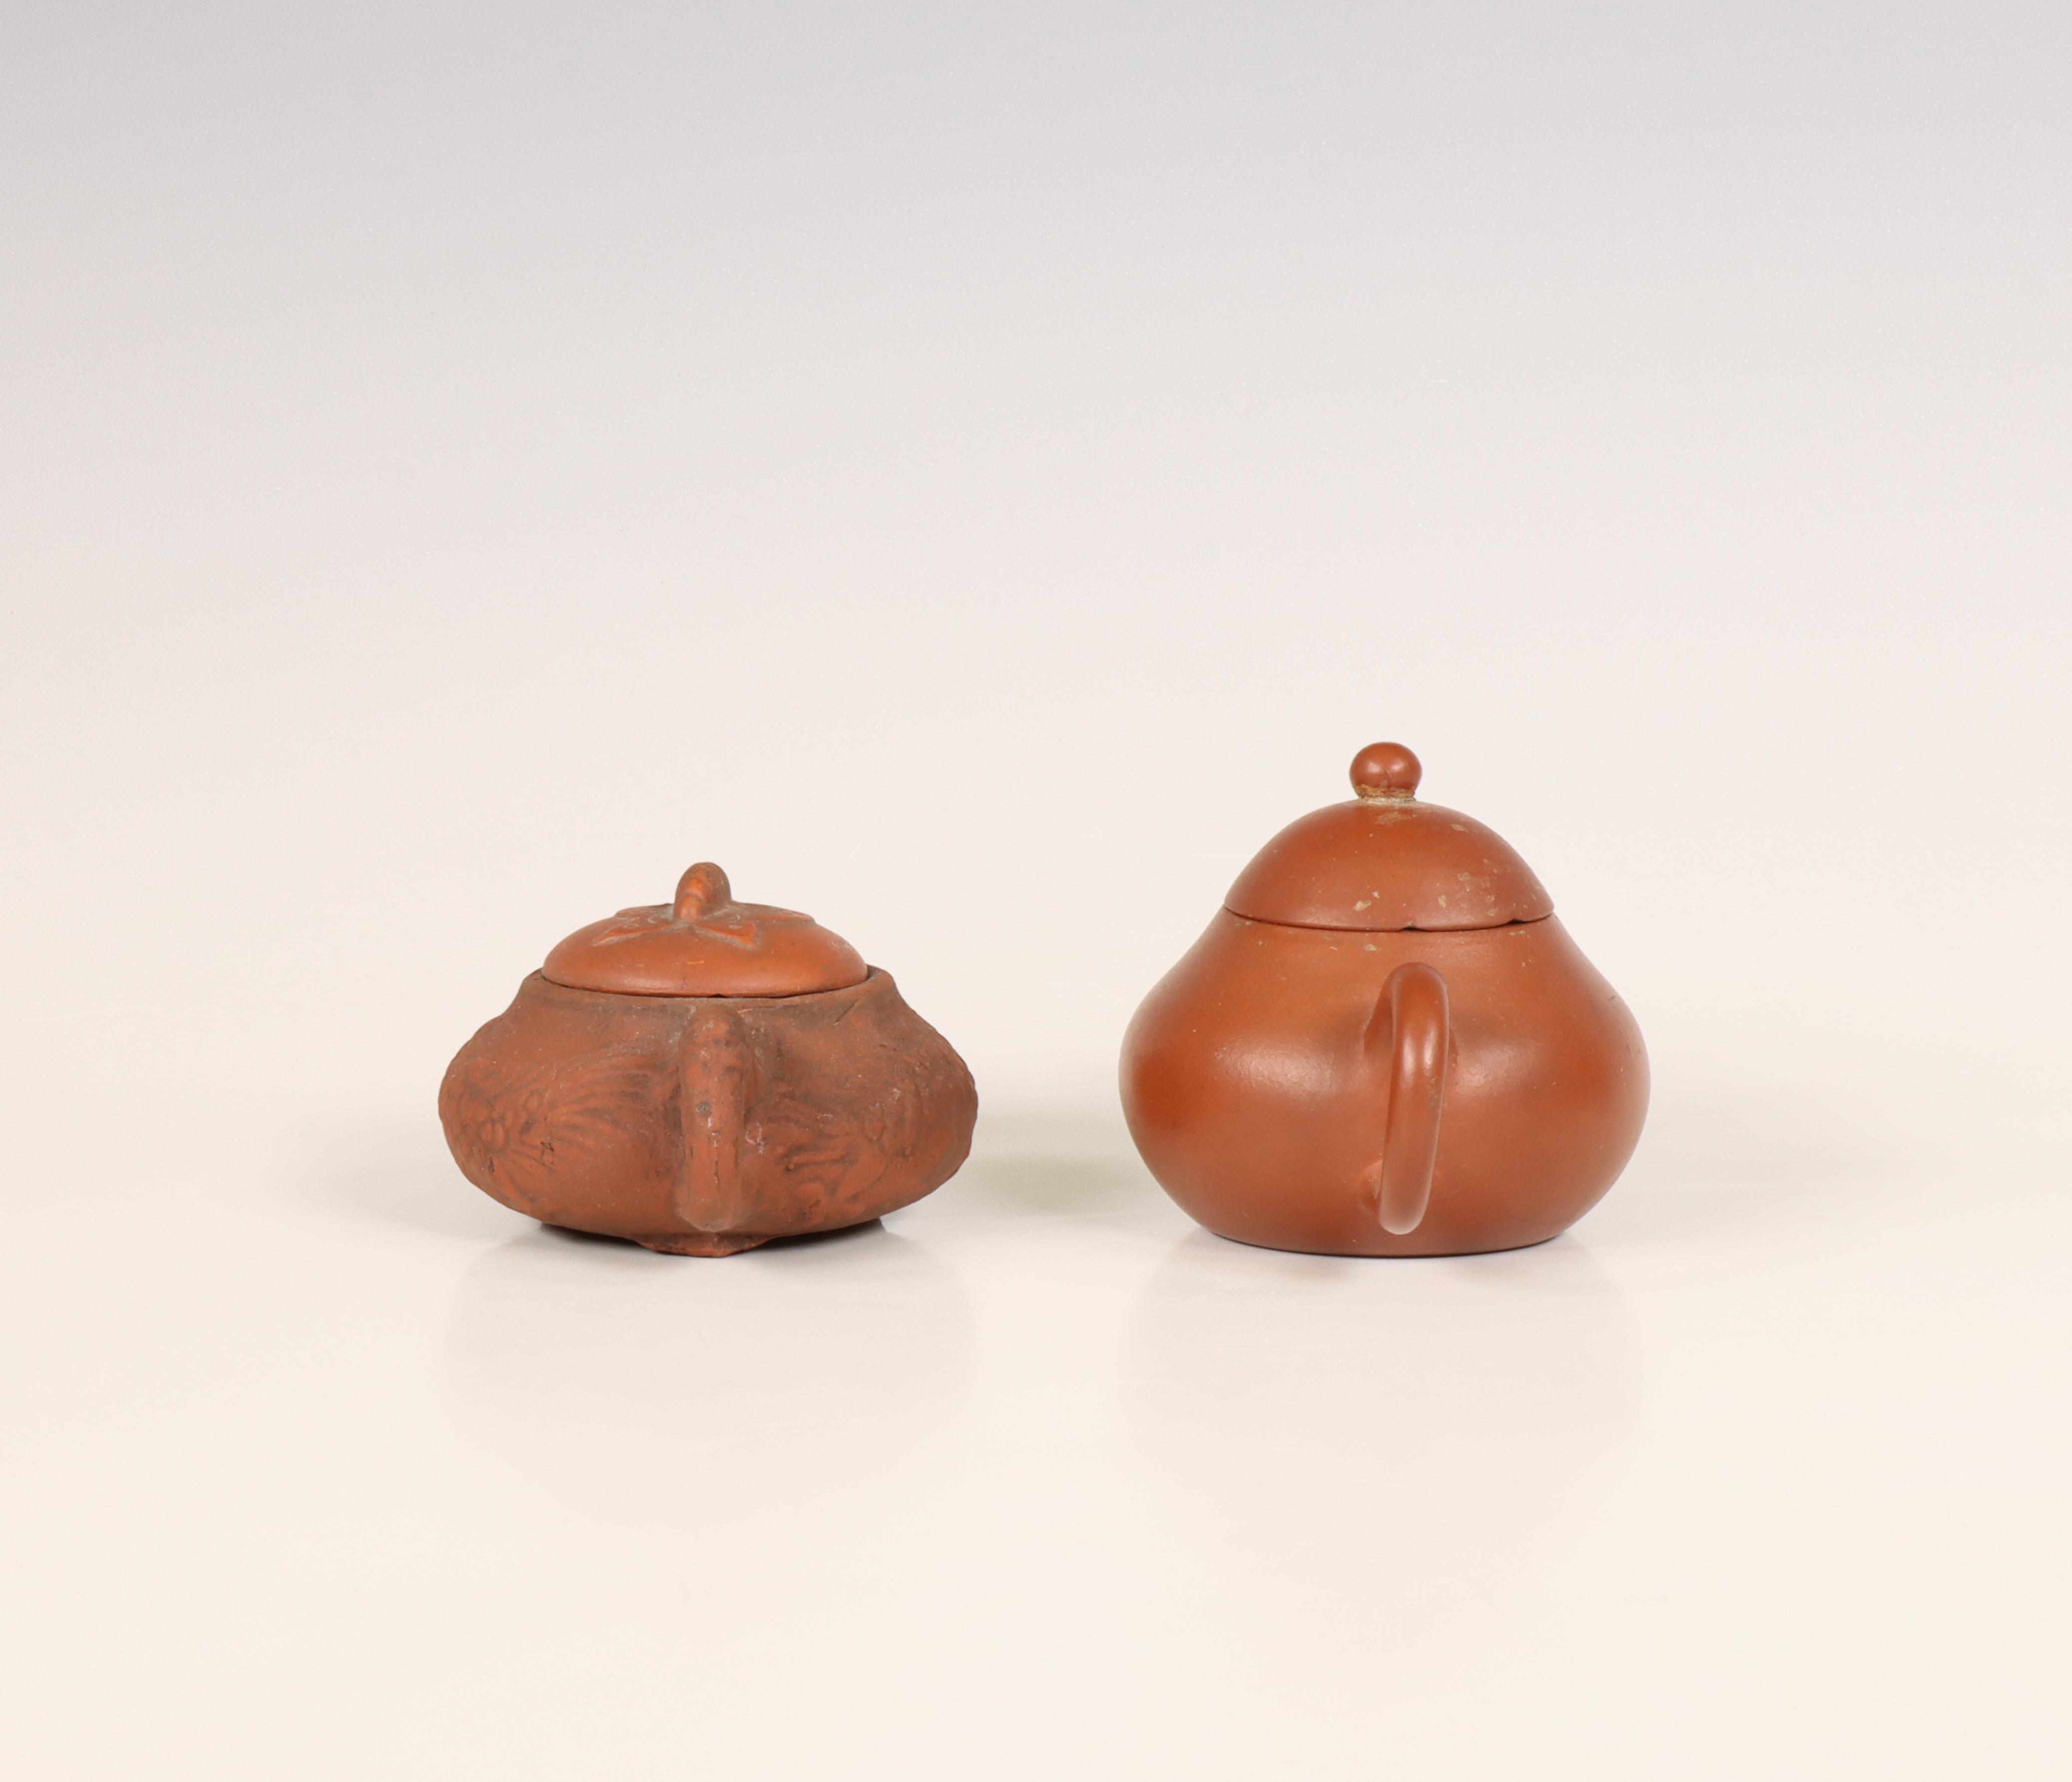 China, two Yixing earthenware teapots, late Qing dynasty (1644-1912), - Image 6 of 6